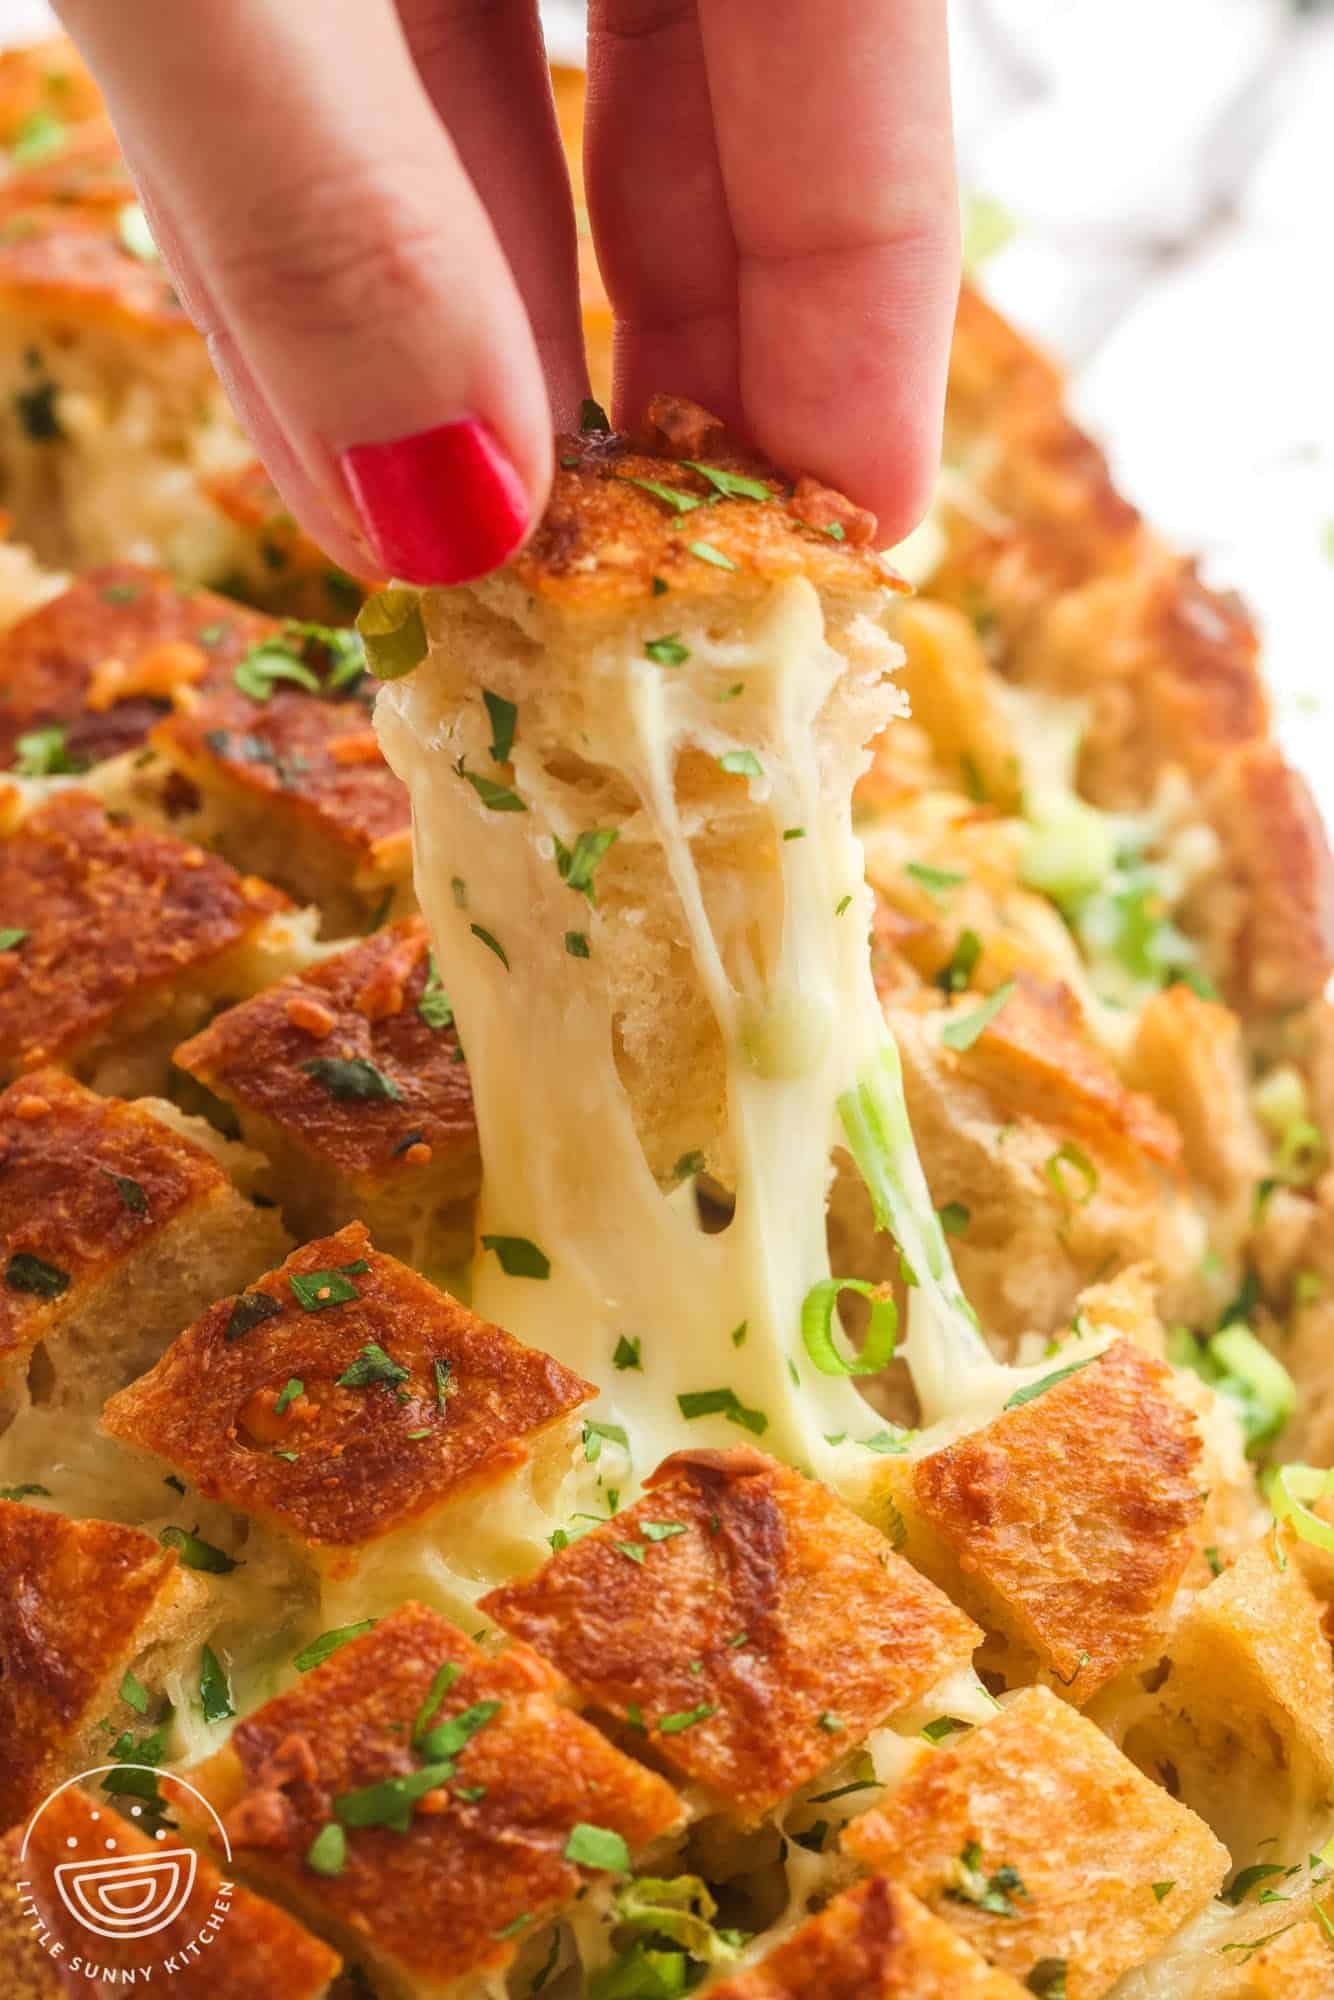 cheesy garlic pull apart bread. A hand is picking up a piece, showing the cheese pull.